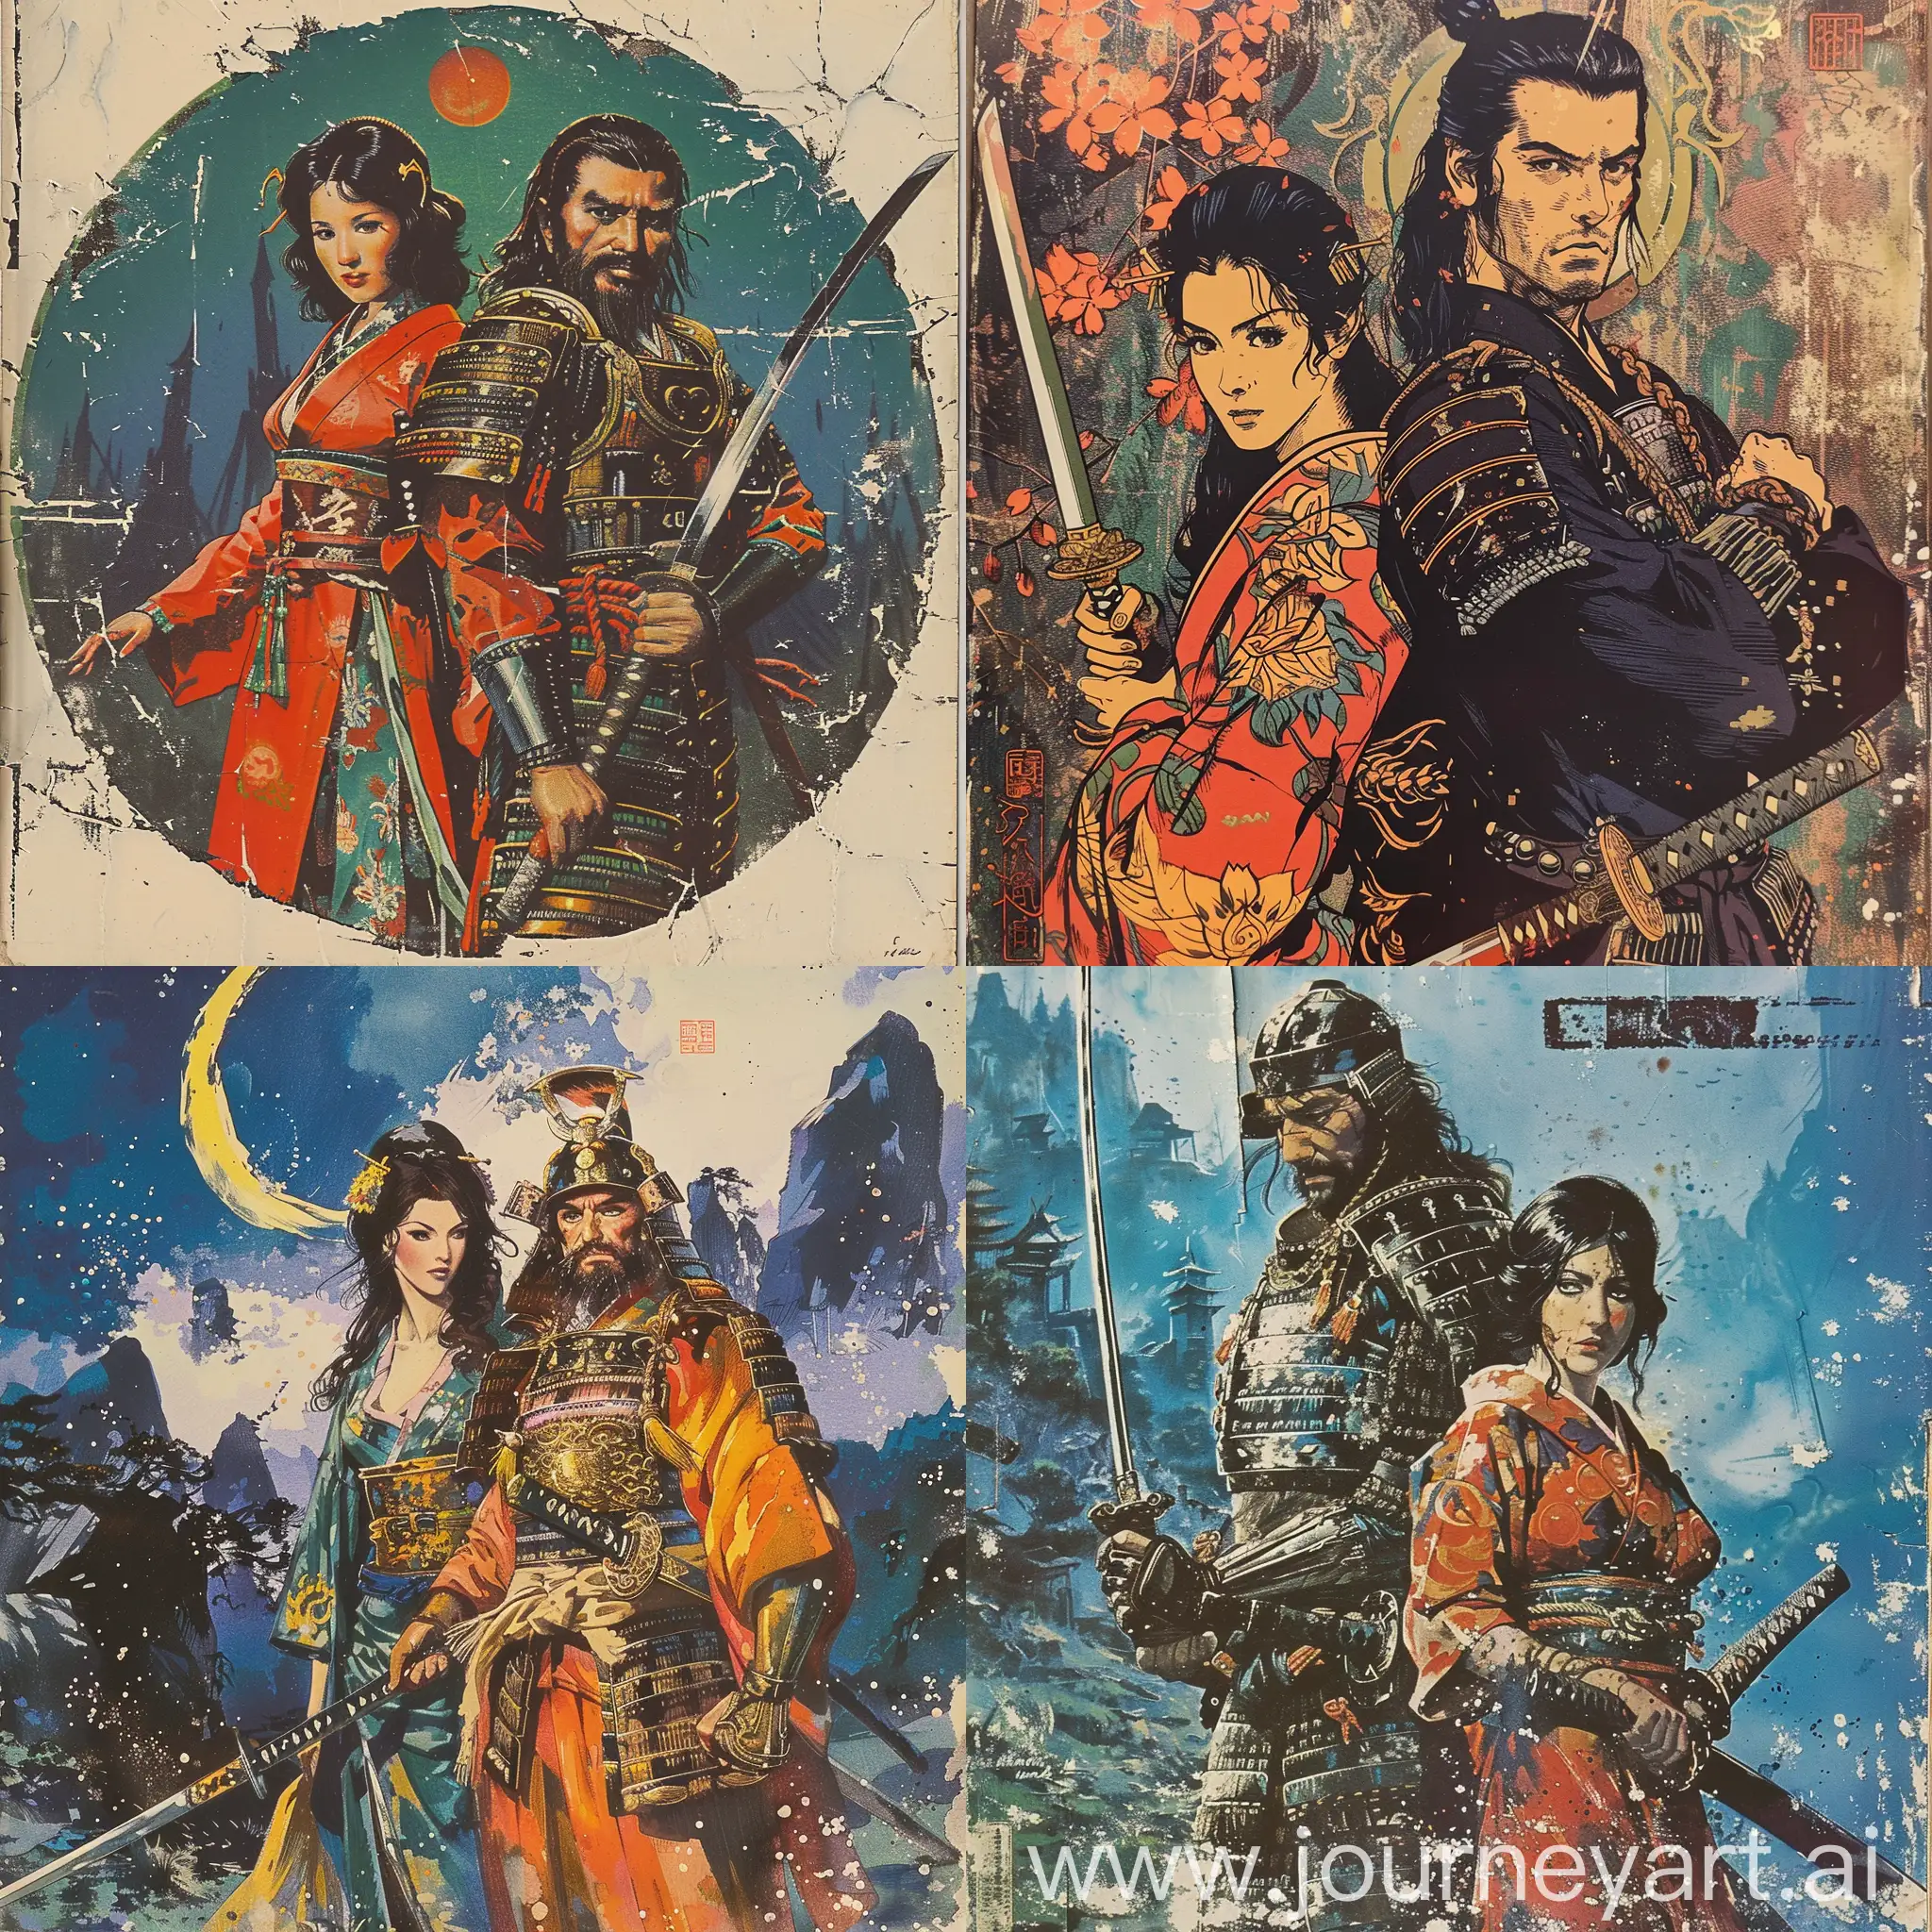 1970s-Dark-Fantasy-Book-Cover-Paper-Art-Dungeons-and-Dragons-Style-with-Samurai-and-His-Wife